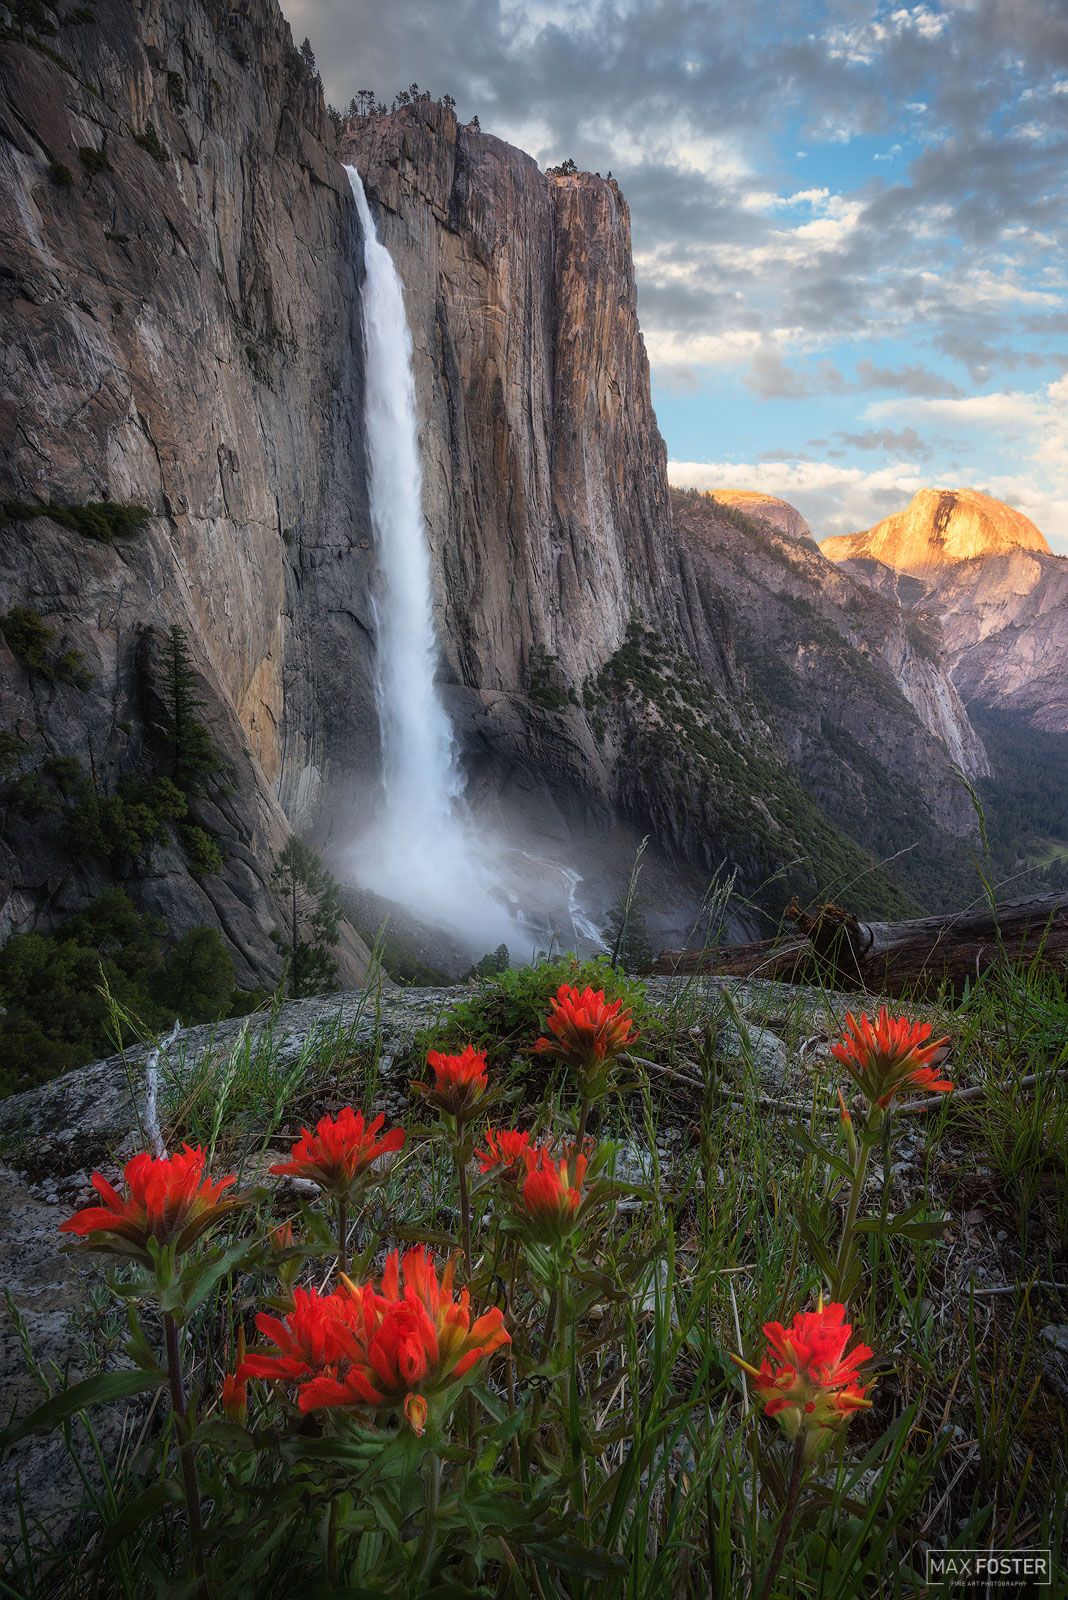 Refresh your space with Patience, Max Foster's limited edition photography print of Yosemite Falls in Yosemite National Park...